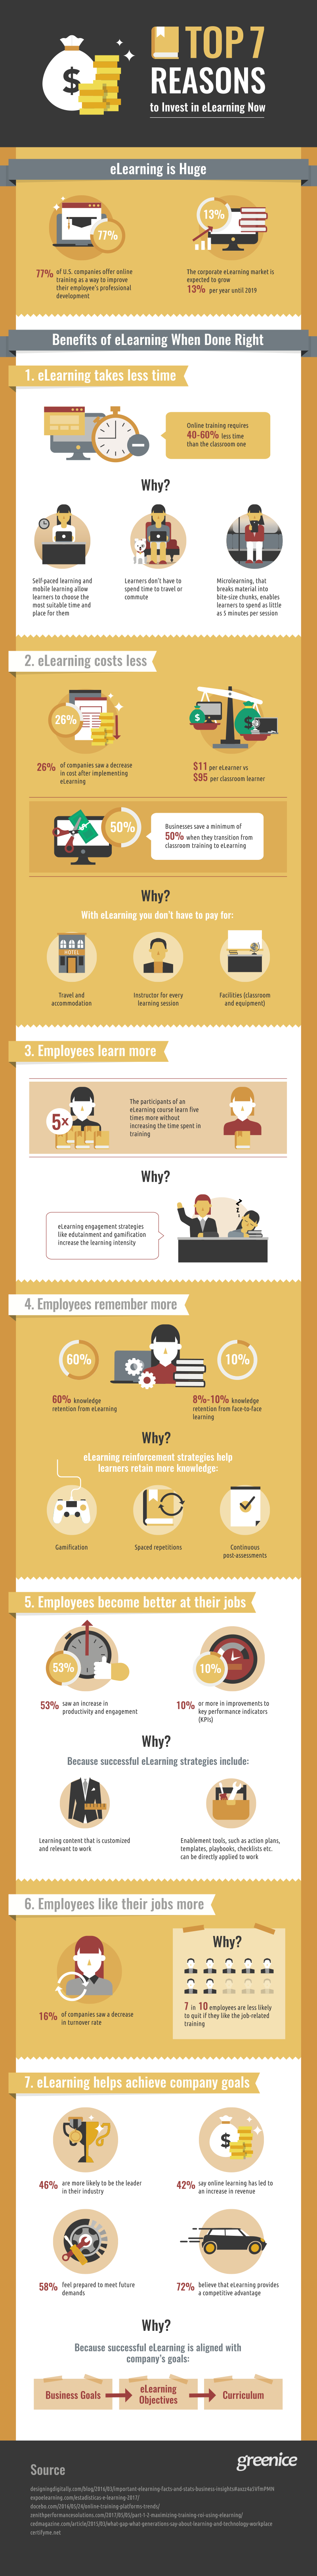 Top 7 Reasons to Invest in eLearning Now [Infographic] - Image 1